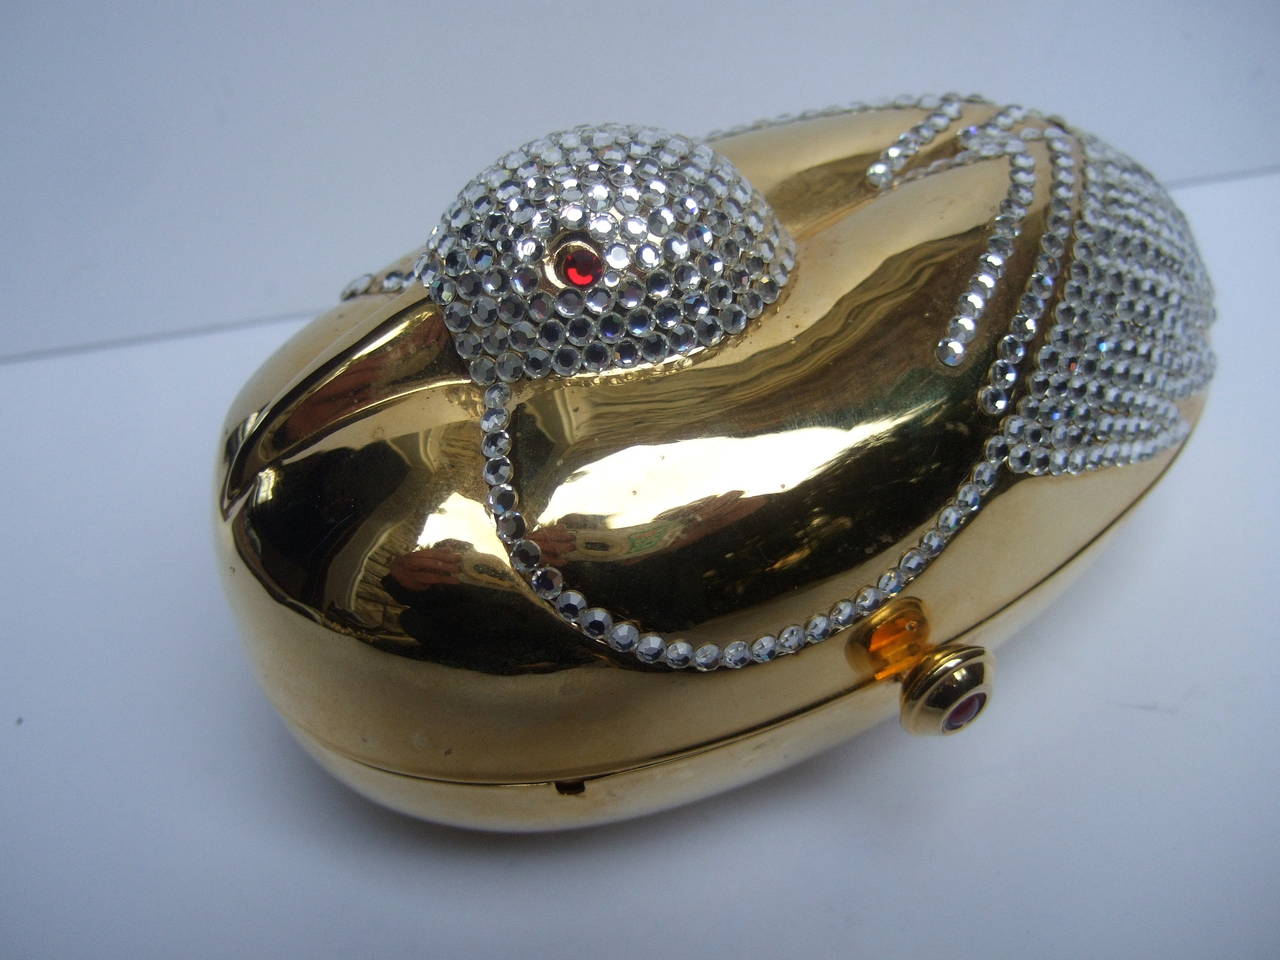 Opulent jeweled gilt metal bird evening bag c 1980
The elegant figural minaudiere evening bag is designed with a nesting bird encrusted with glittering diamante crystals. The brilliant crystals illuminate against the sleek gilt metal. The bird's